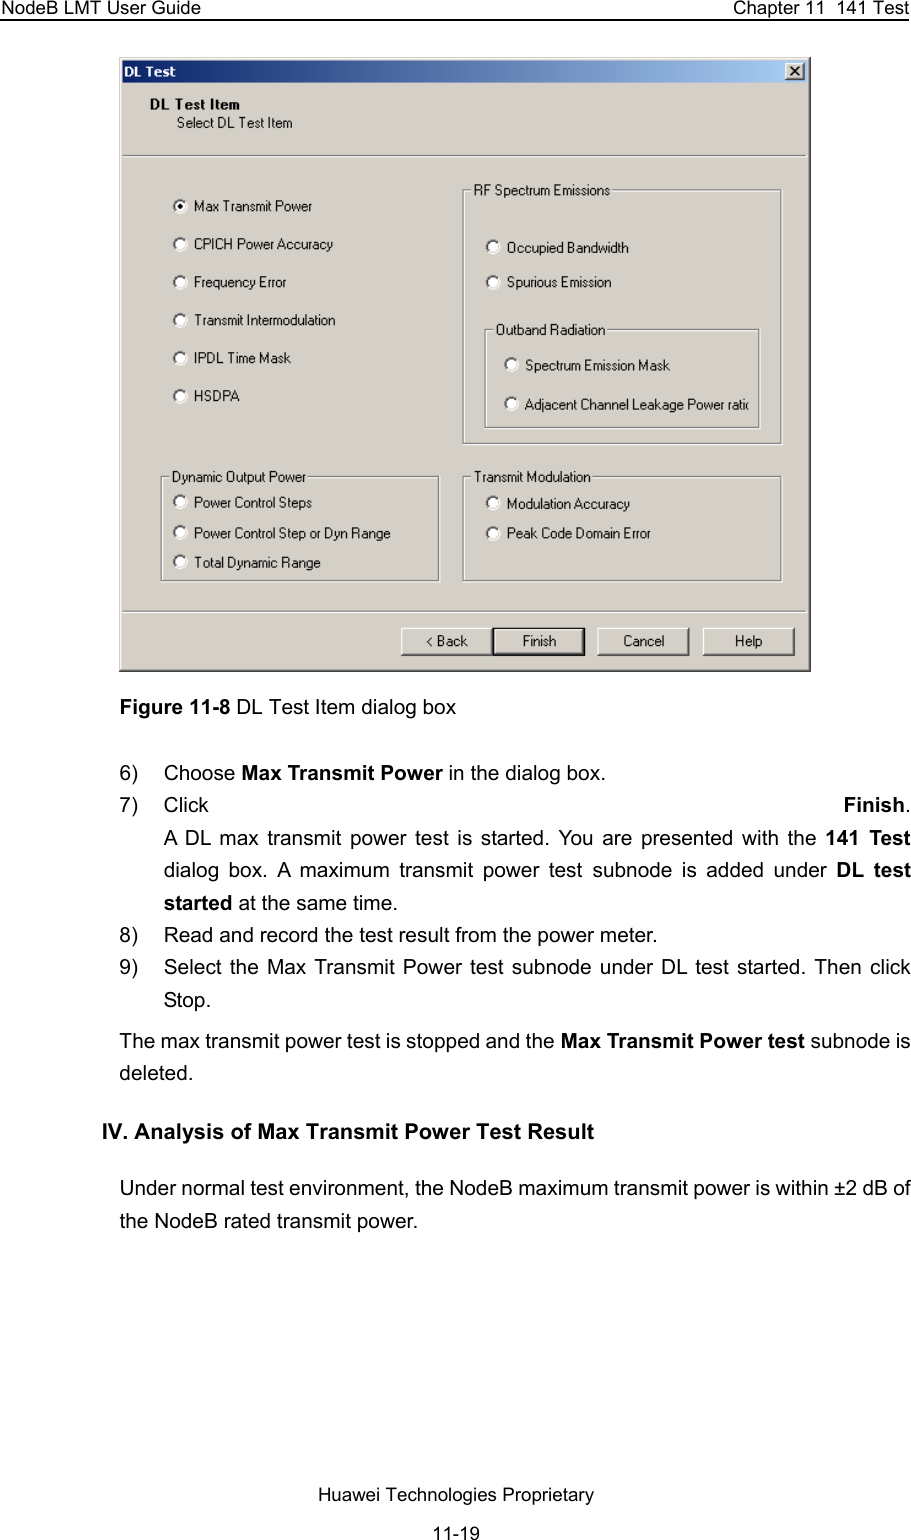 NodeB LMT User Guide  Chapter 11  141 Test  Figure 11-8 DL Test Item dialog box 6) Choose Max Transmit Power in the dialog box.  7) Click  Finish.  A DL max transmit power test is started. You are presented with the 141 Test dialog box. A maximum transmit power test subnode is added under DL test started at the same time. 8)  Read and record the test result from the power meter.  9)  Select the Max Transmit Power test subnode under DL test started. Then click Stop.  The max transmit power test is stopped and the Max Transmit Power test subnode is deleted. IV. Analysis of Max Transmit Power Test Result Under normal test environment, the NodeB maximum transmit power is within ±2 dB of the NodeB rated transmit power.  Huawei Technologies Proprietary 11-19 